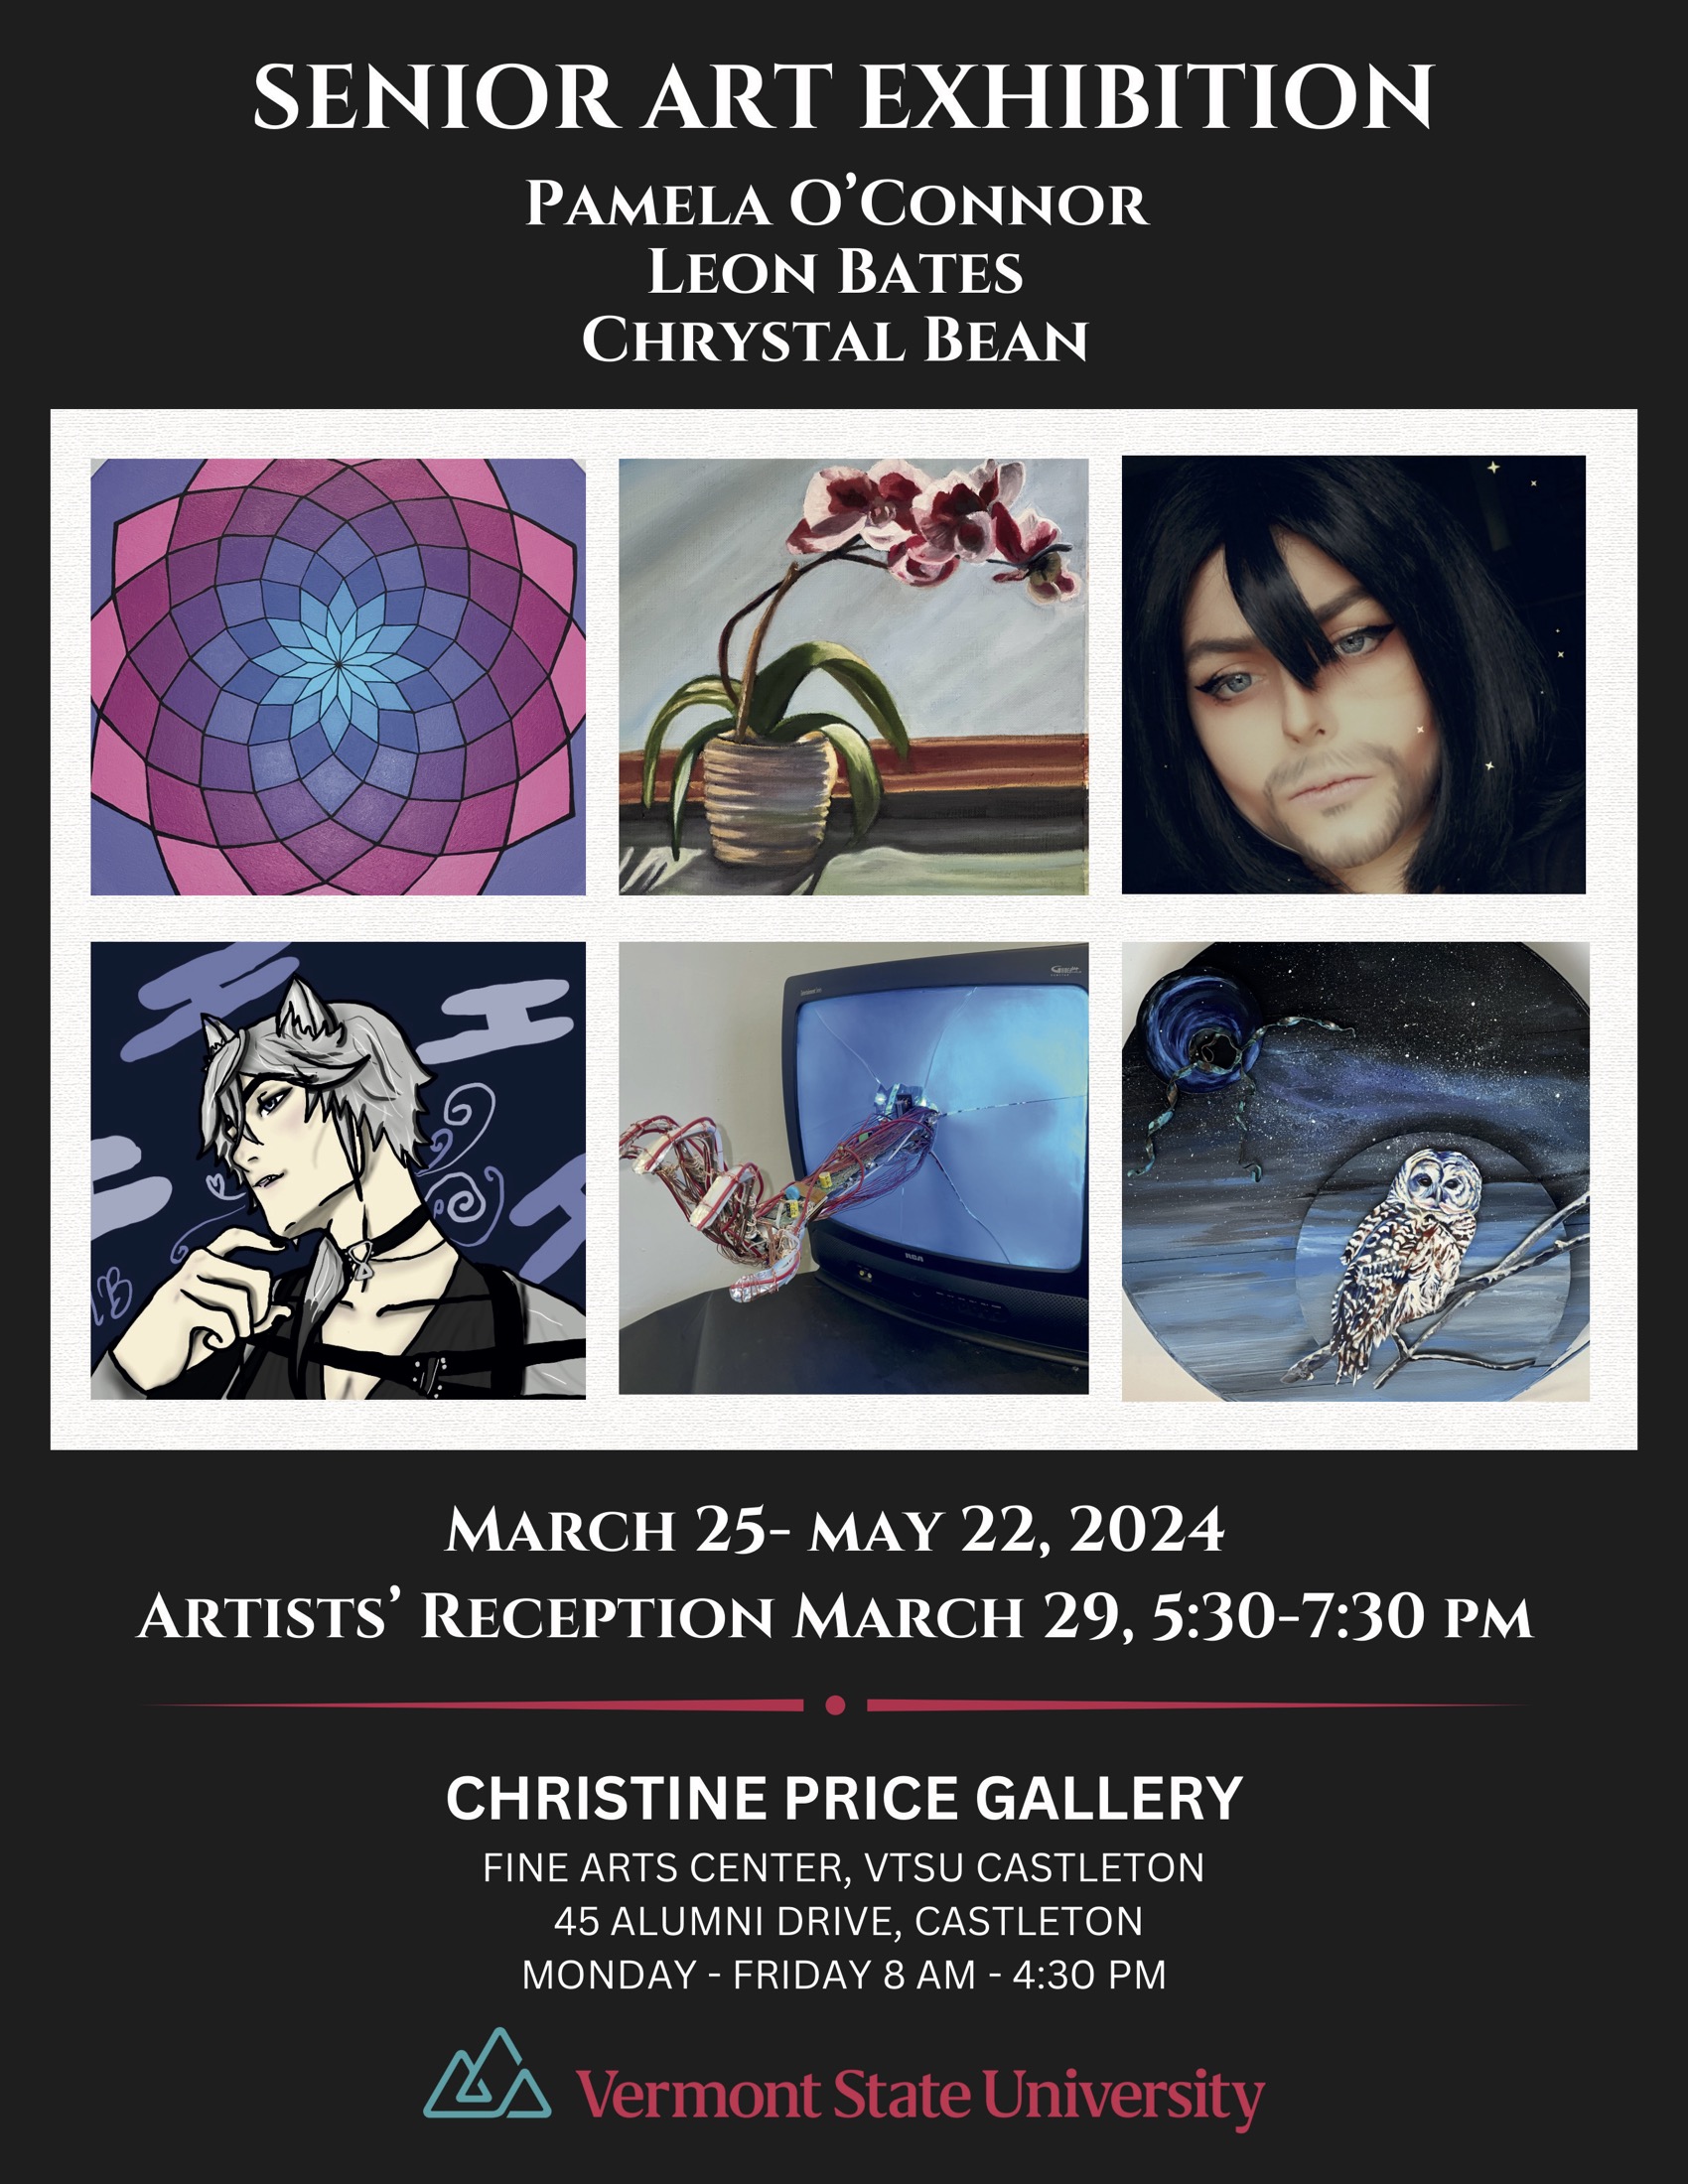 The Christine Price Gallery happily presents "The Senior Art Exhibition" being held from Monday, March 25th - Wednesday, May 22nd!

There will be an Artist Reception held Friday, March 29th from 5:30 - 7:30 pm.

This exhibit will be a culmination of these students' entire university experience.  Please show your support by checking their work out and visiting their reception!

The show will include amazing works from Seniors Pamela O'Connor, Leon Bates and Chrystal Bean.